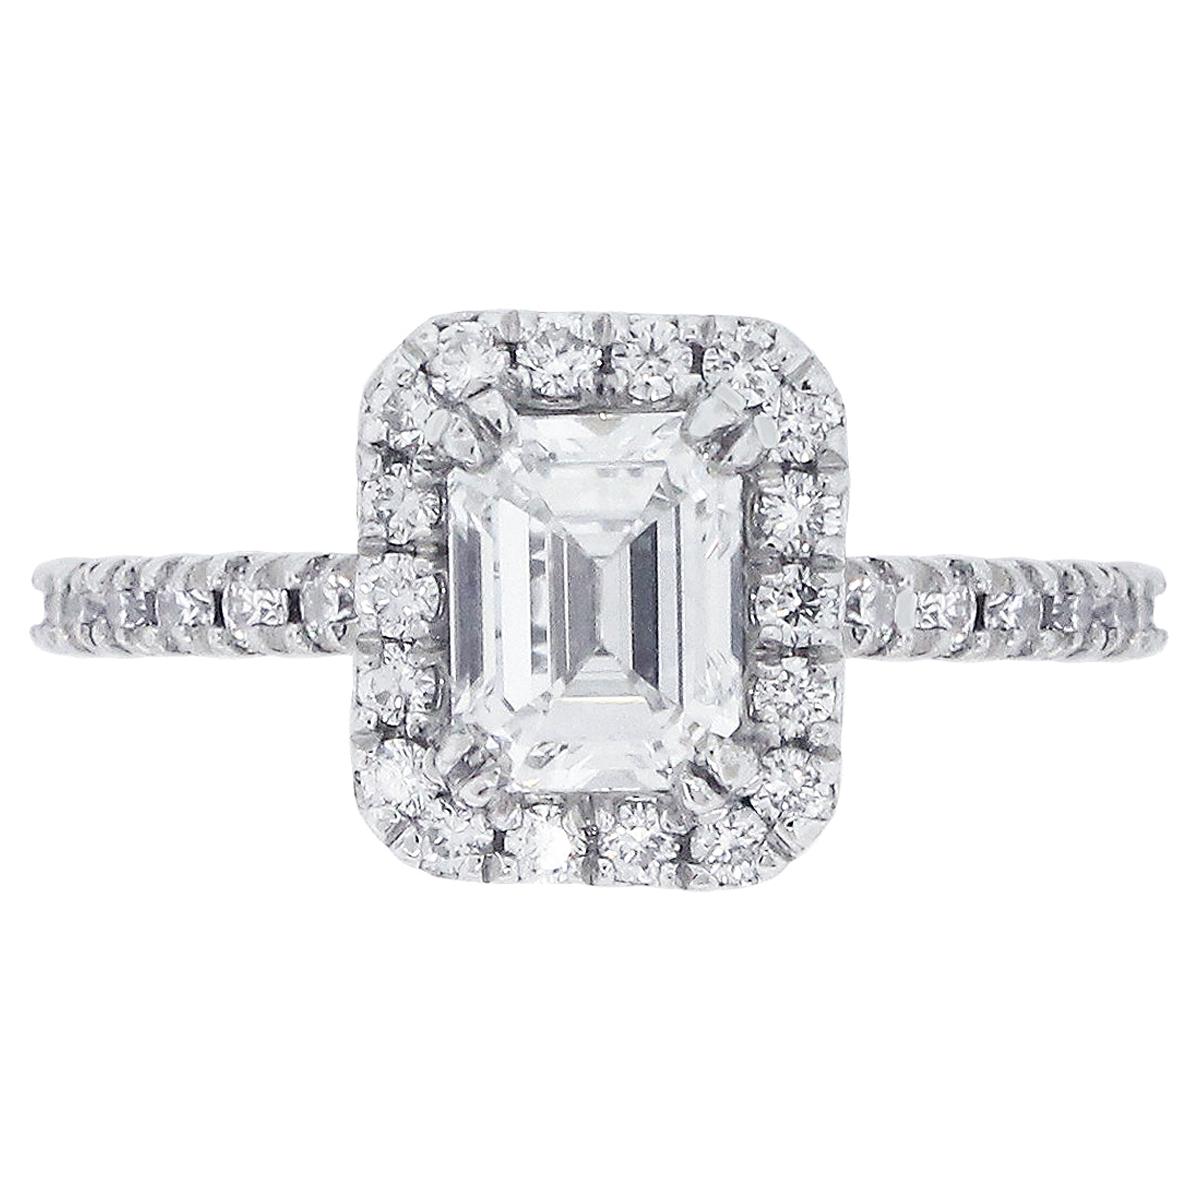 GIA Certified 0.83 Carat Diamond Engagement Ring For Sale